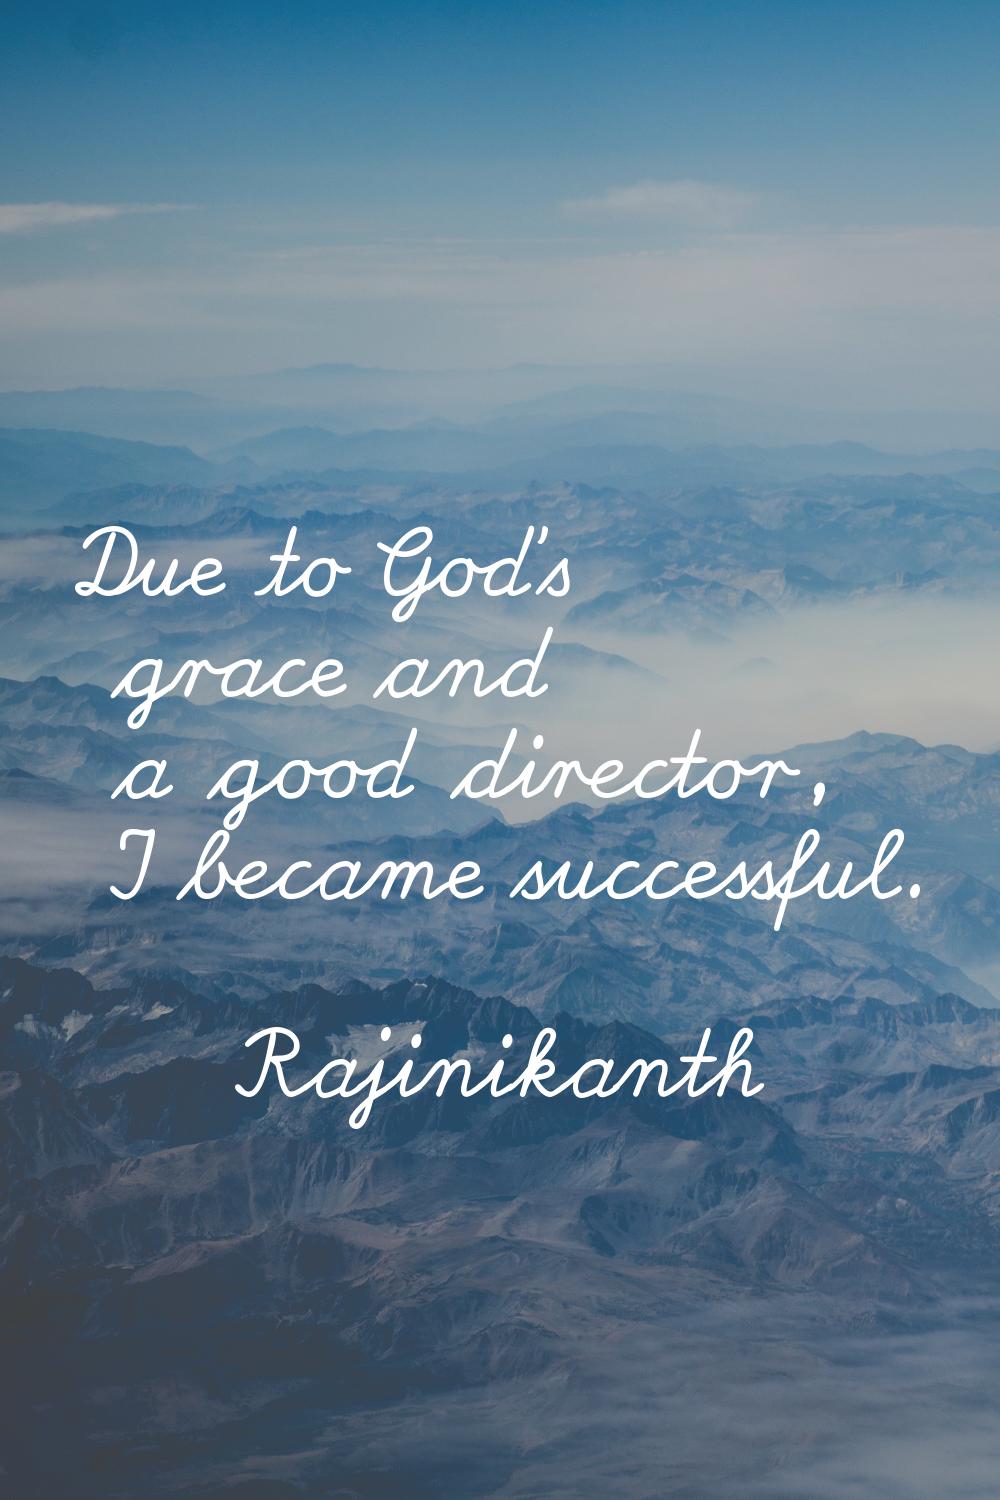 Due to God's grace and a good director, I became successful.